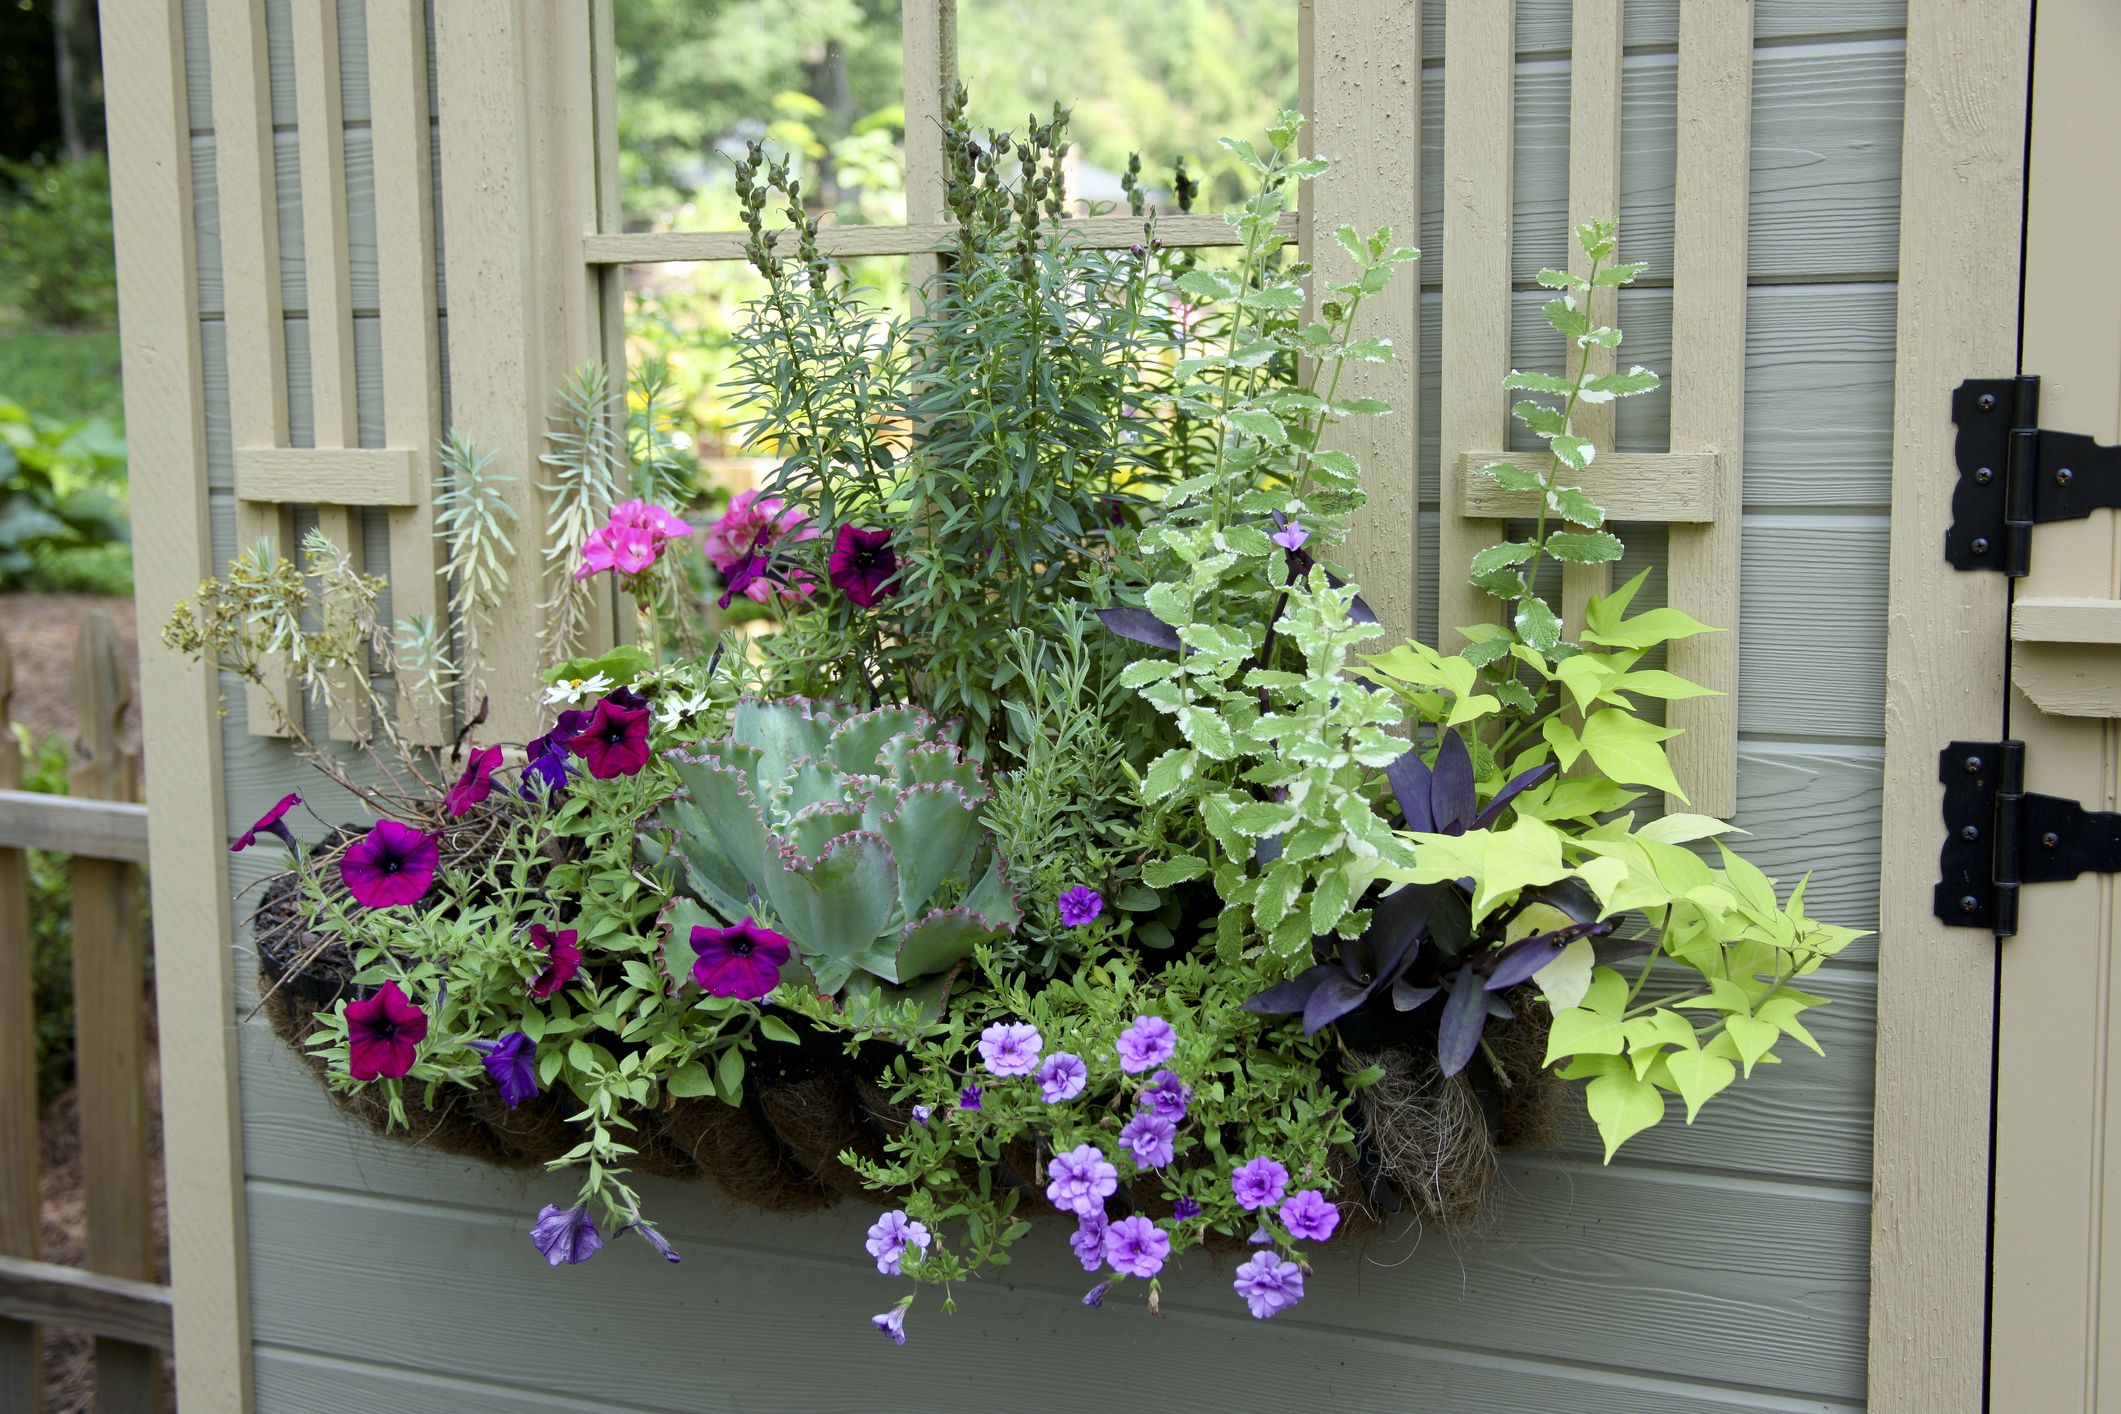  Planter Box Ideas To Inspire You - Front Of House Planter Box Ideas